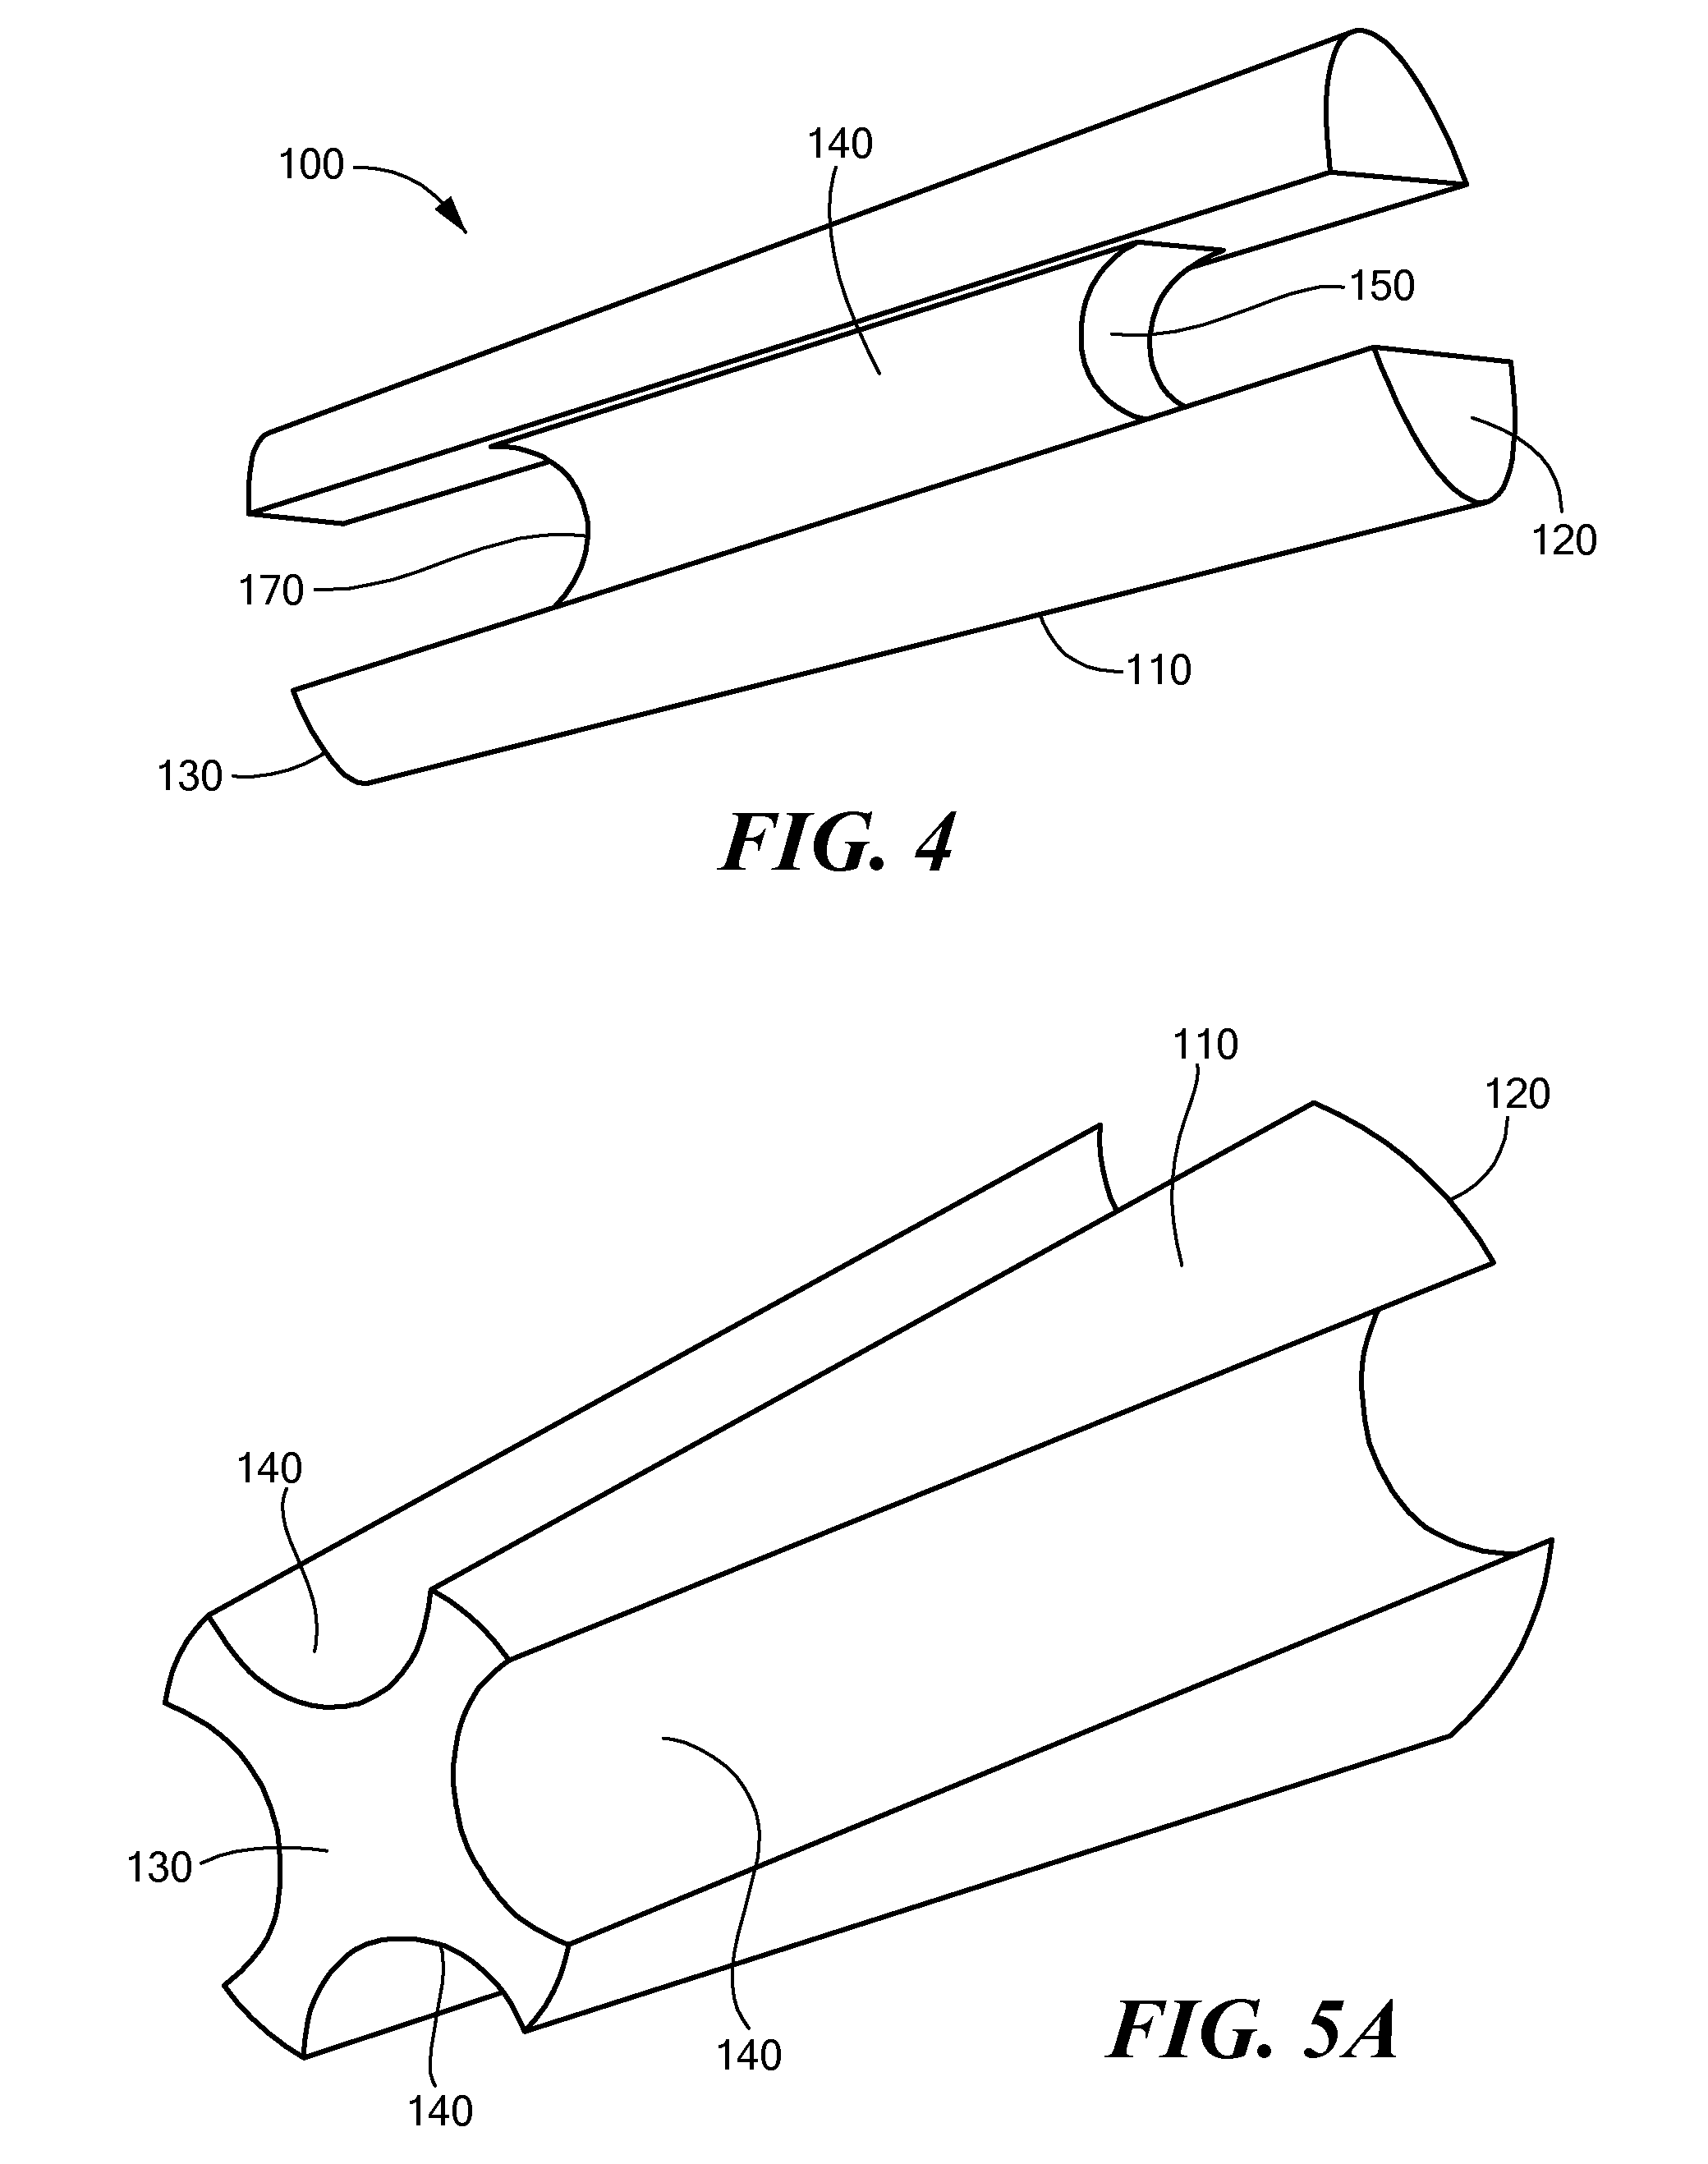 Method and Device for Stabilizing Joints With Limited Axial Movement